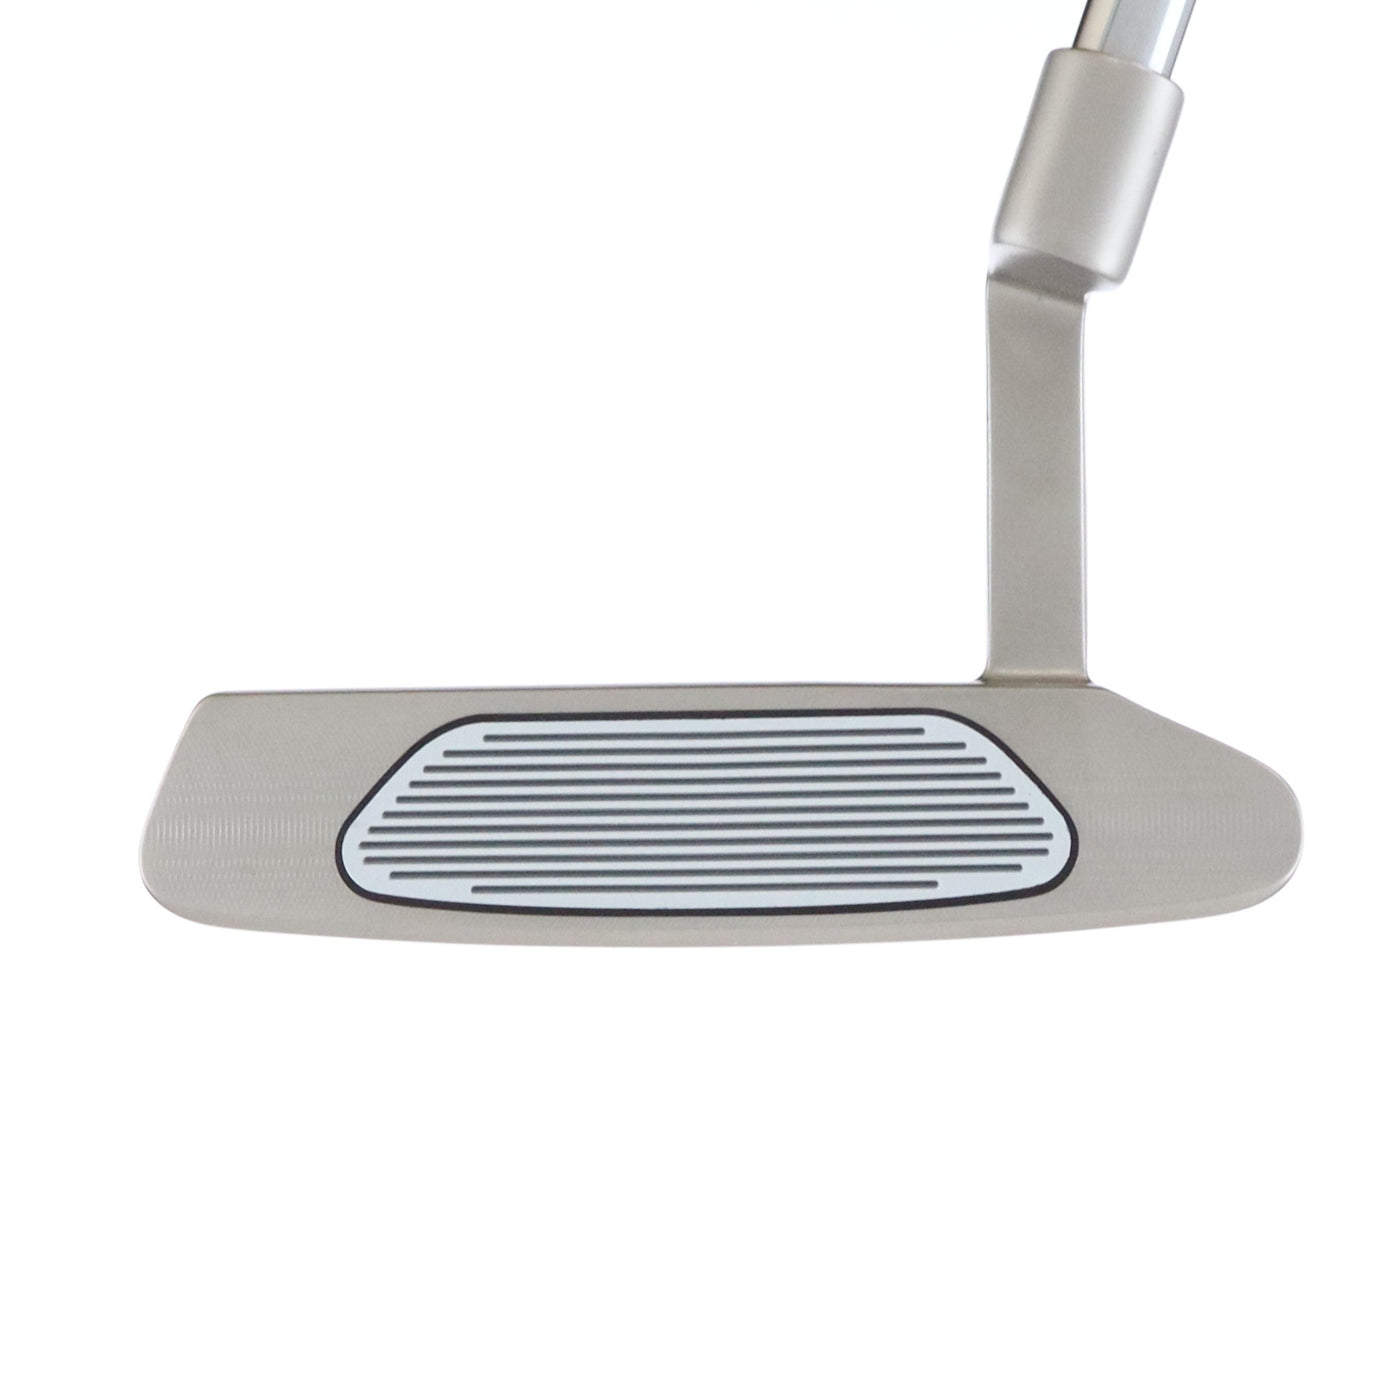 taylormade putter openboxtp collection hydro blast del monte 1 33 inch